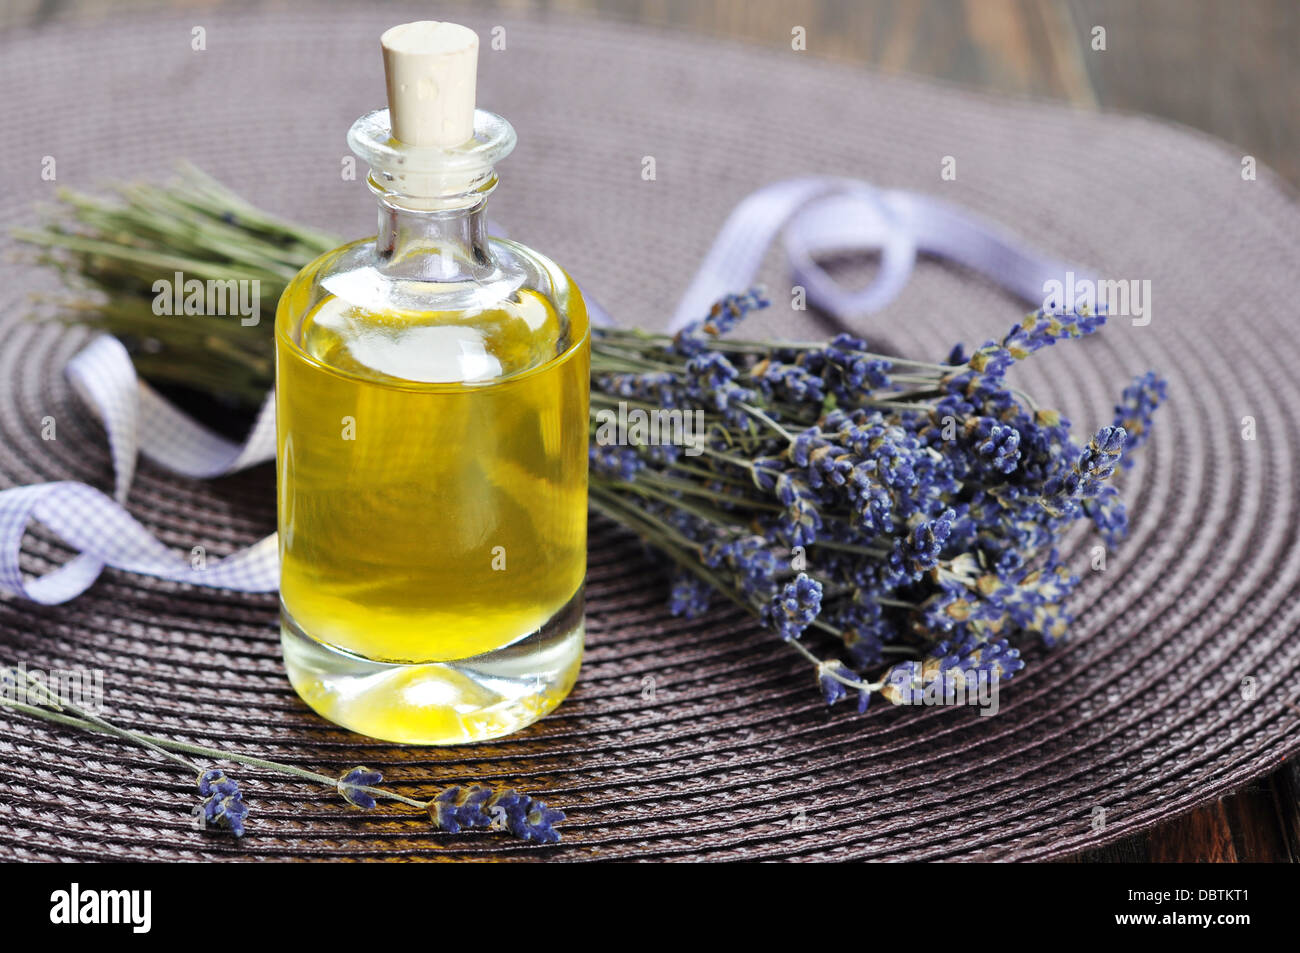 essential lavender oil with fresh flowers on wooden  Stock Photo